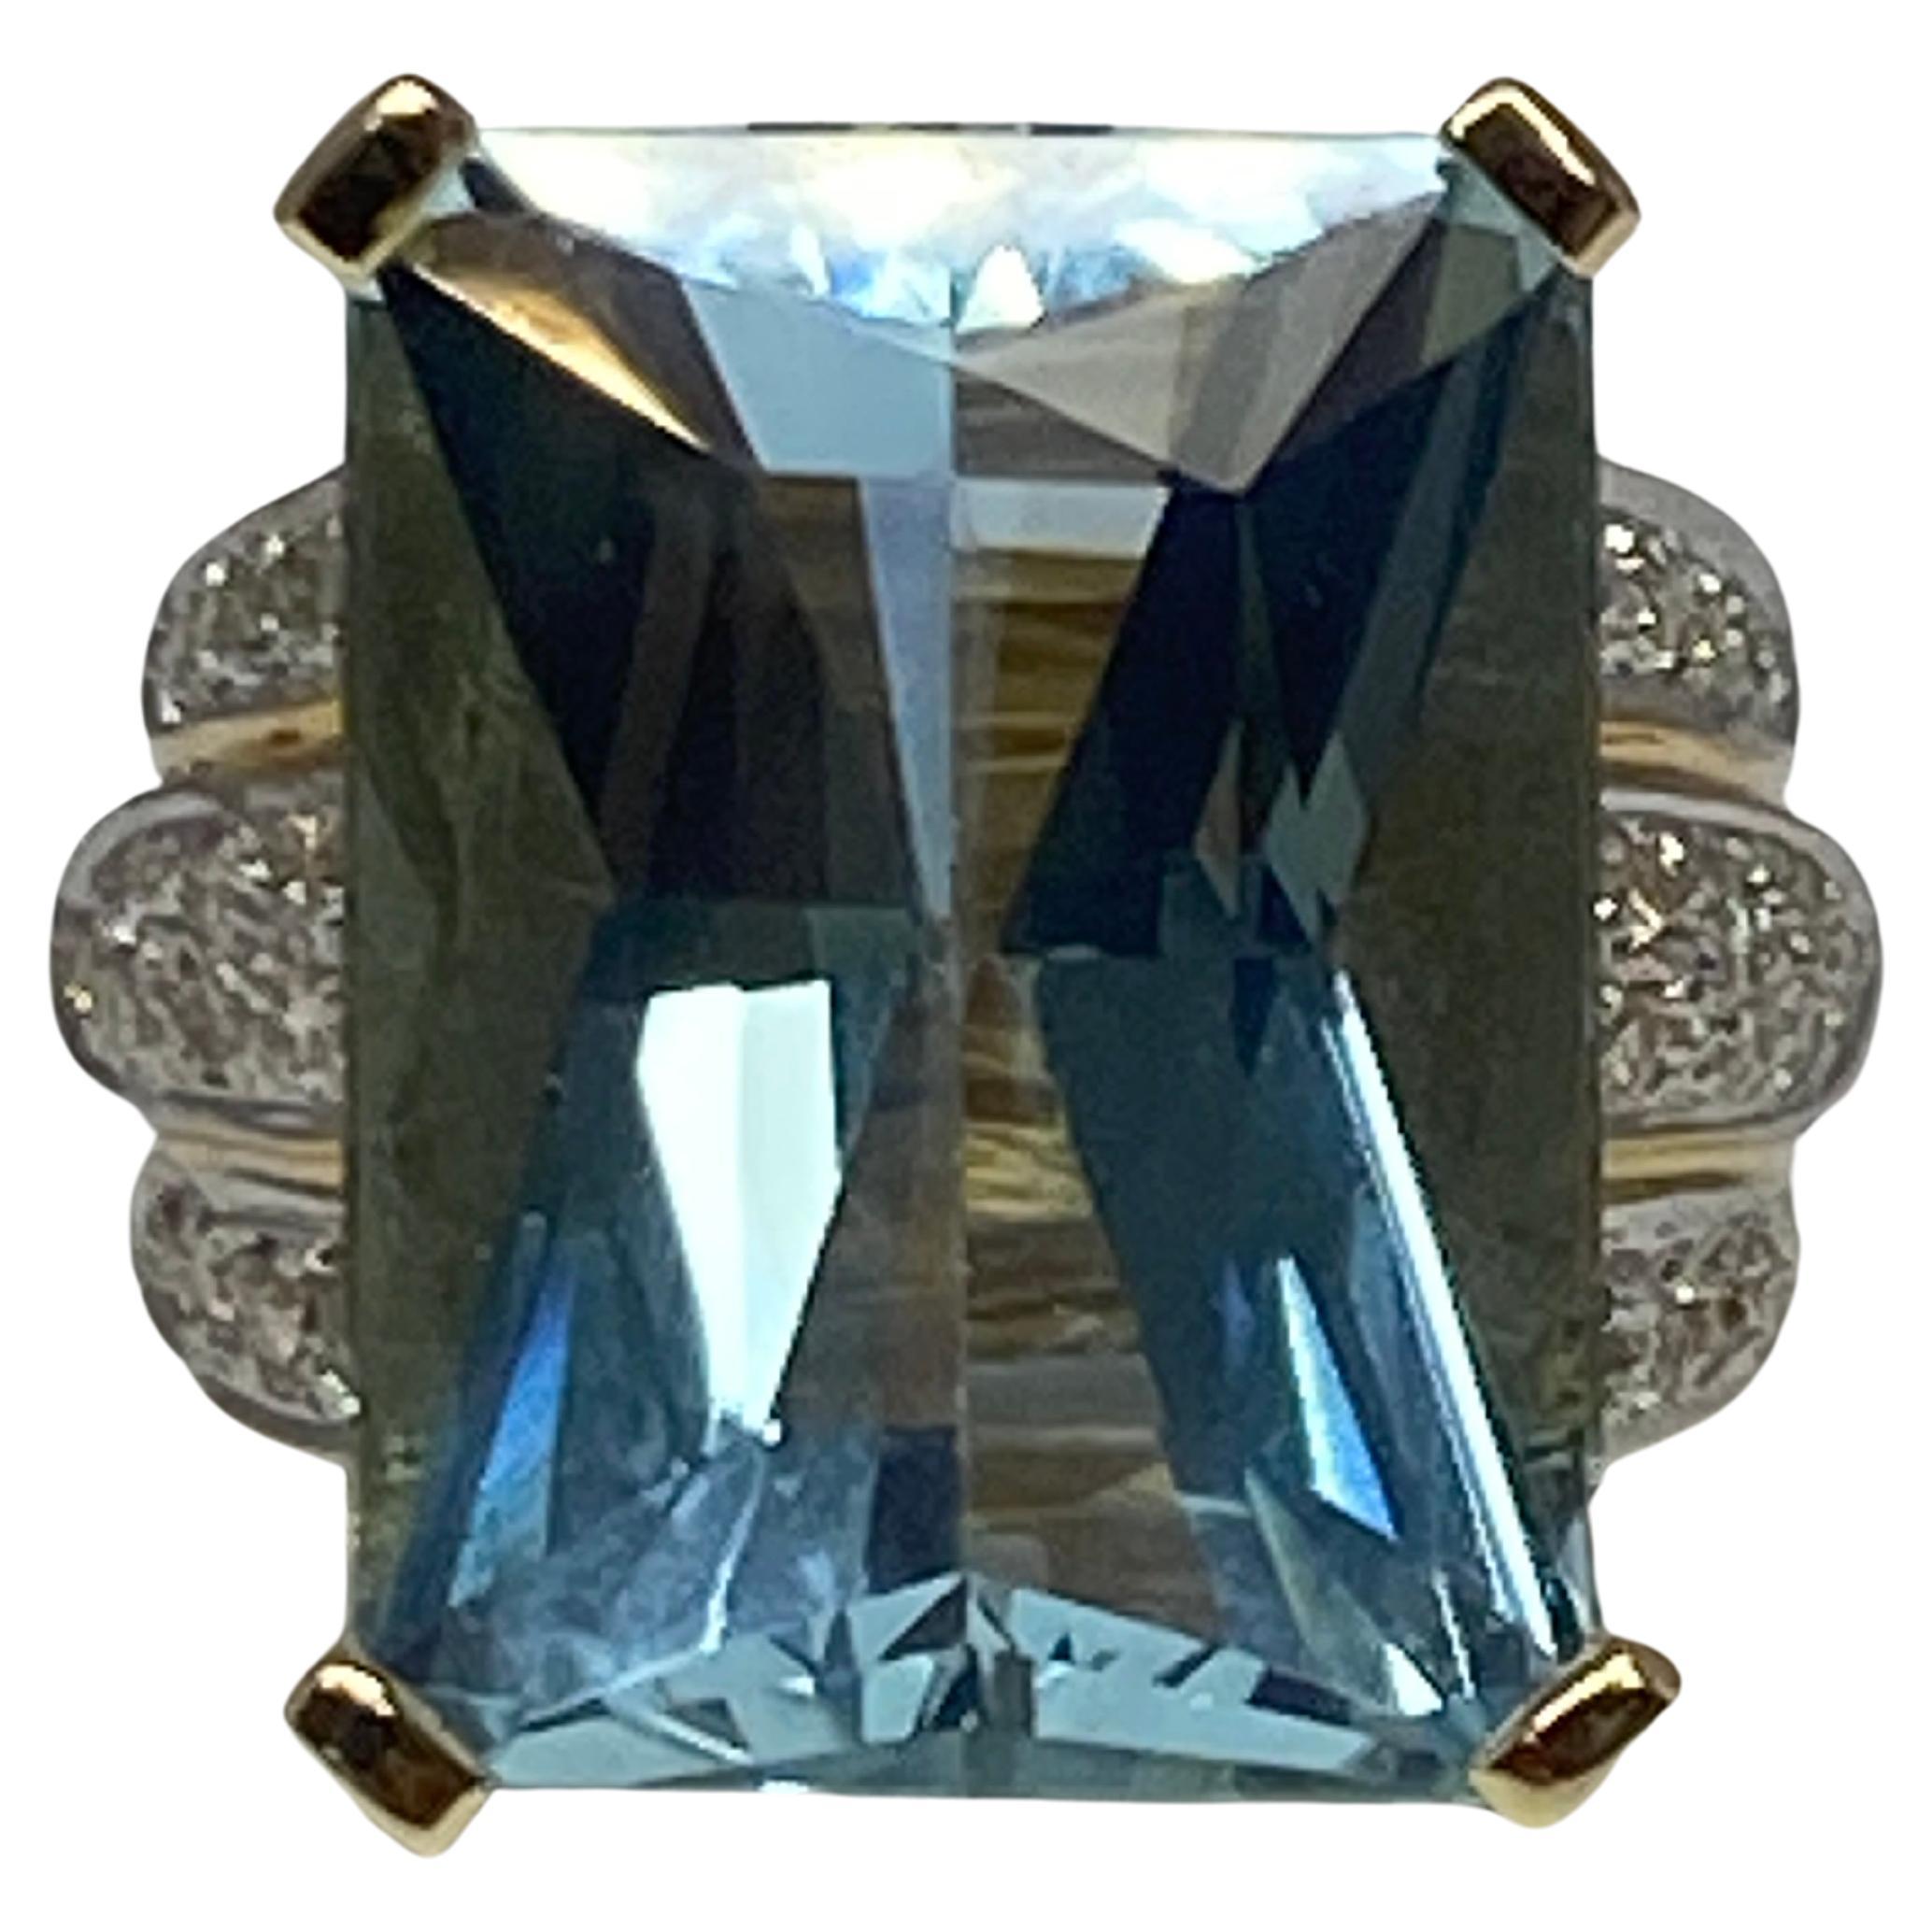 This aquamarine cocktail ring is a fabulous statement piece, At the center sits a large natural 21 carat serene blue aquamarine with a fantastic sparkling and unusual mixed cut design. The substantial chunky setting catches the eye with it's